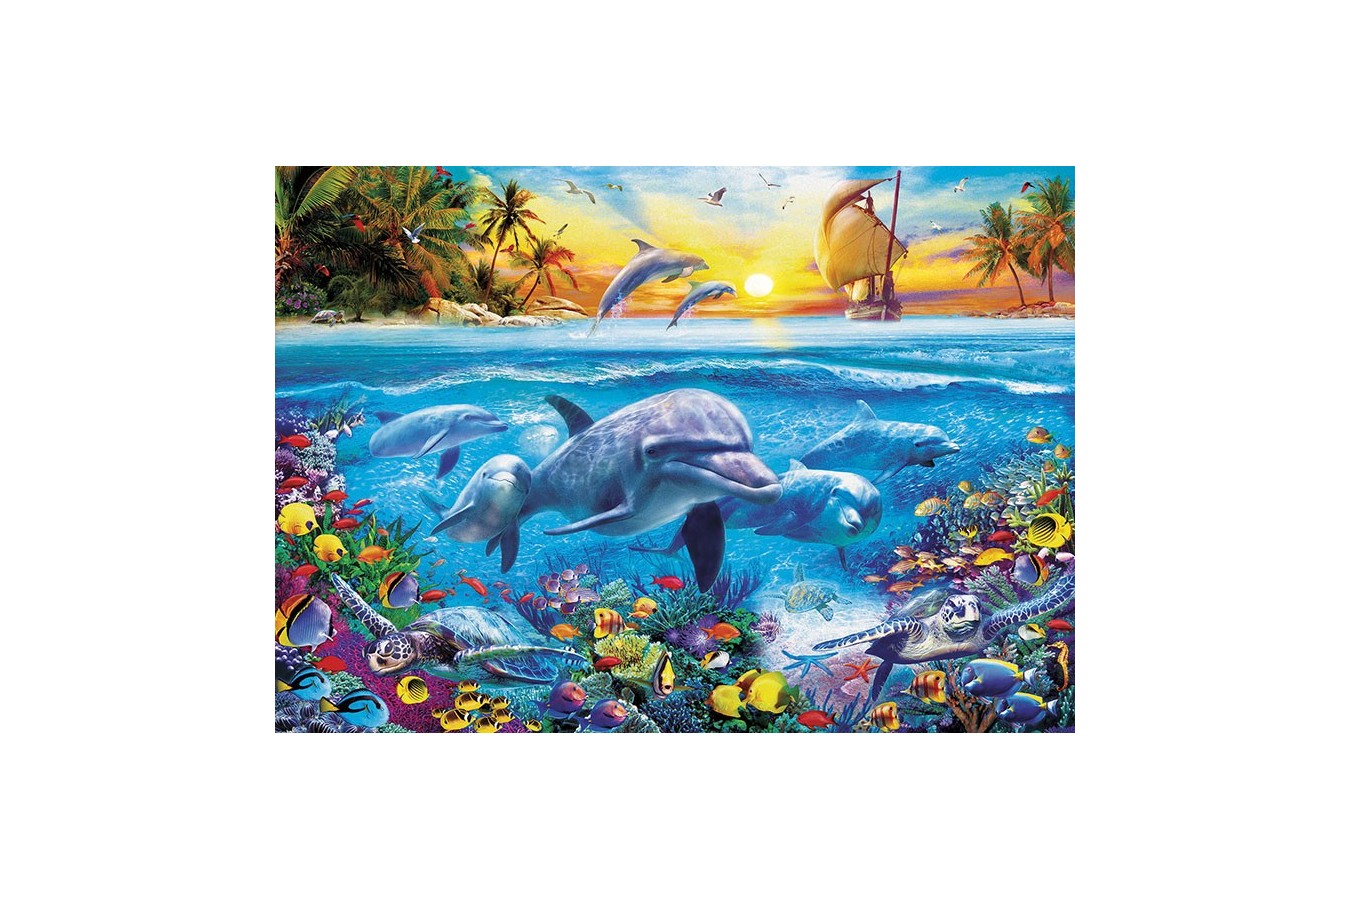 Puzzle Educa - Family of dolphins, 2000 piese, include lipici puzzle (17672)